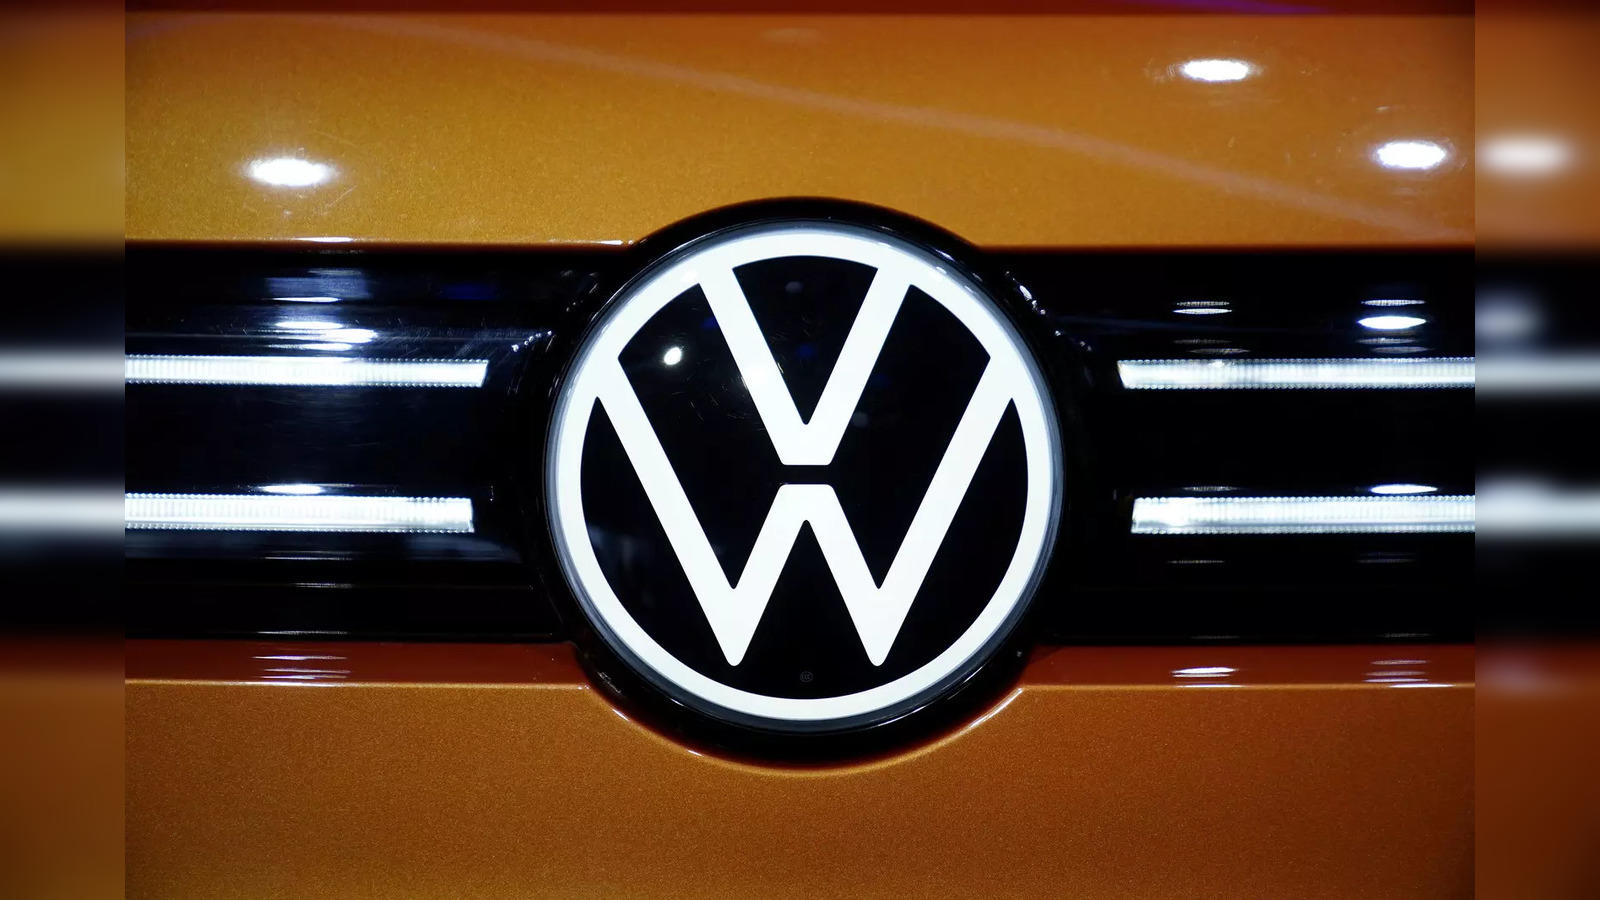 Volkswagen aims to double electric car sales in China this year after  missing targets - The Economic Times